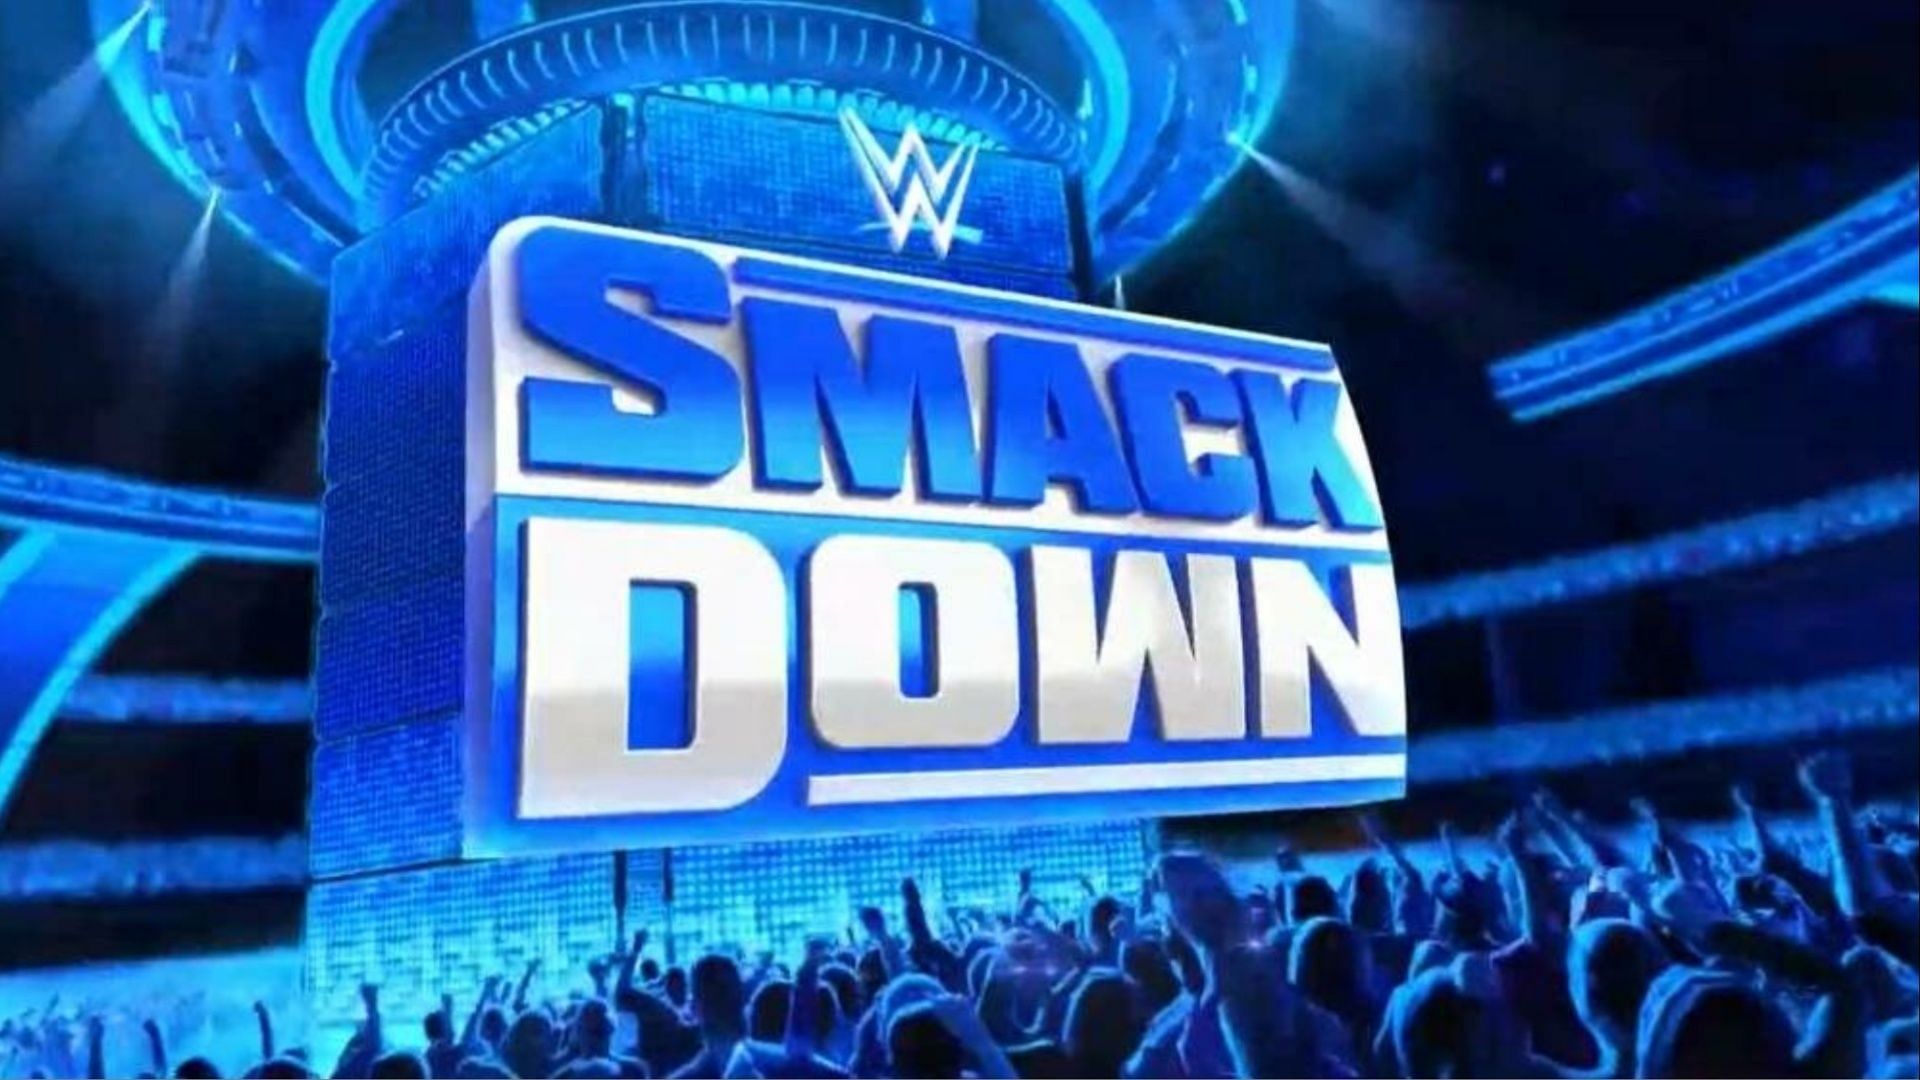 SmackDown is the home of many top WWE stars.